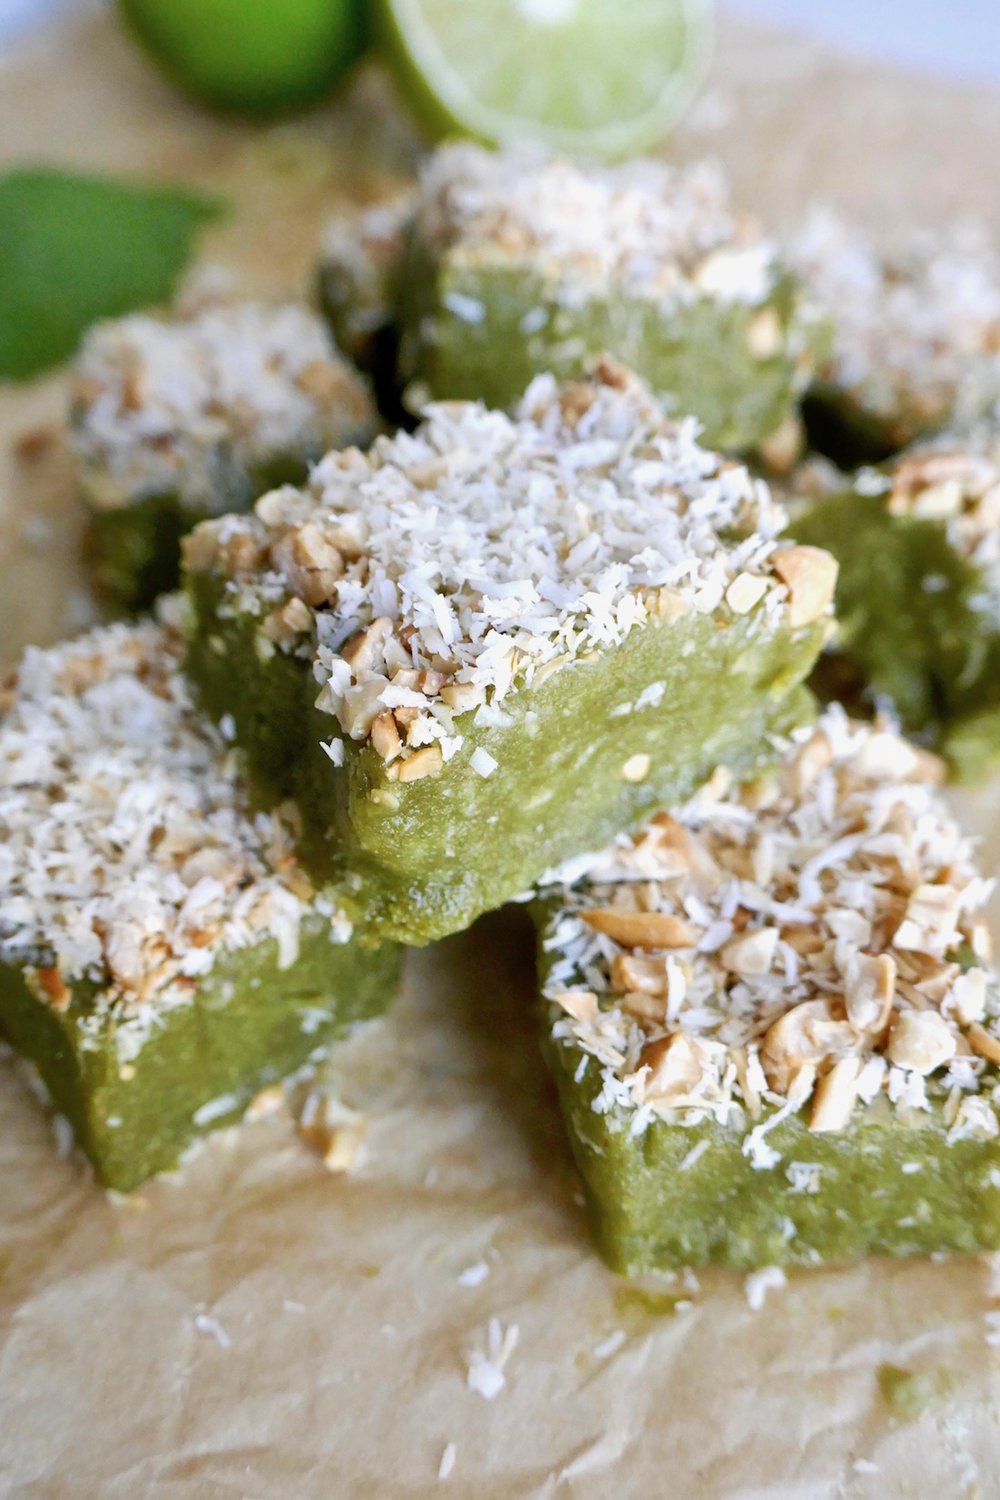 A different Type of Energy Bite: Cashew Lime Energy Bites, GF vegan | Tasting Page